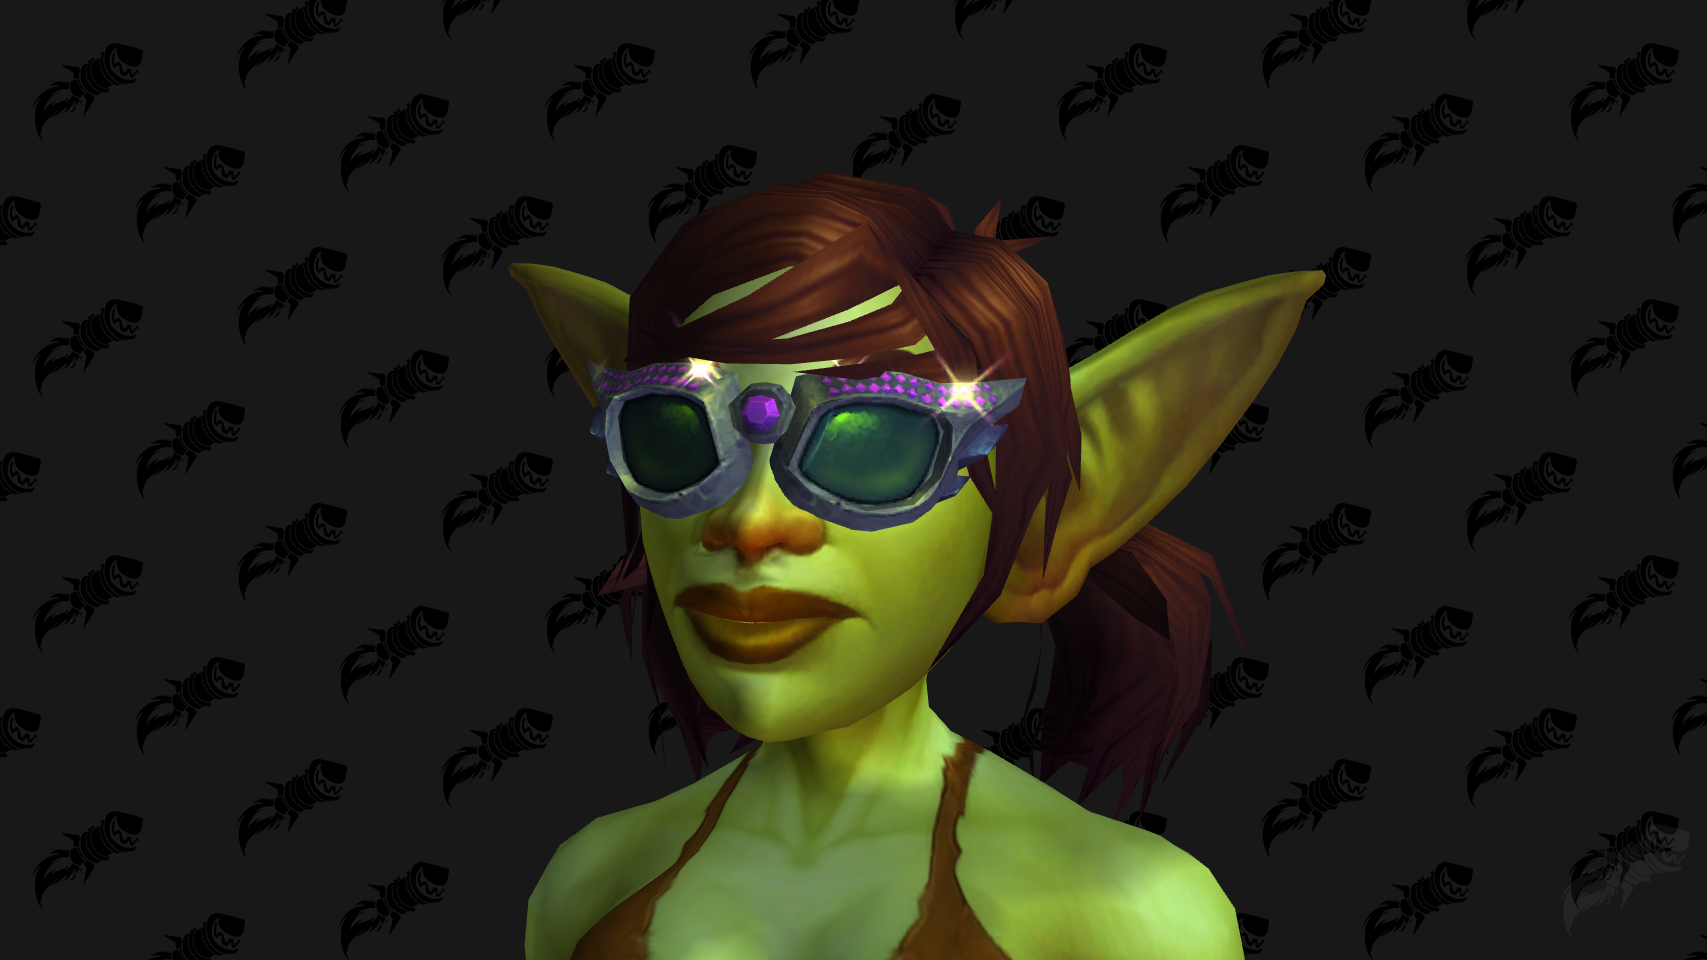 gaben artilleri fætter Top Hats, Monocles, and Year-Round Holiday Transmog? New Cosmetics in  10.0.5 - Wowhead News